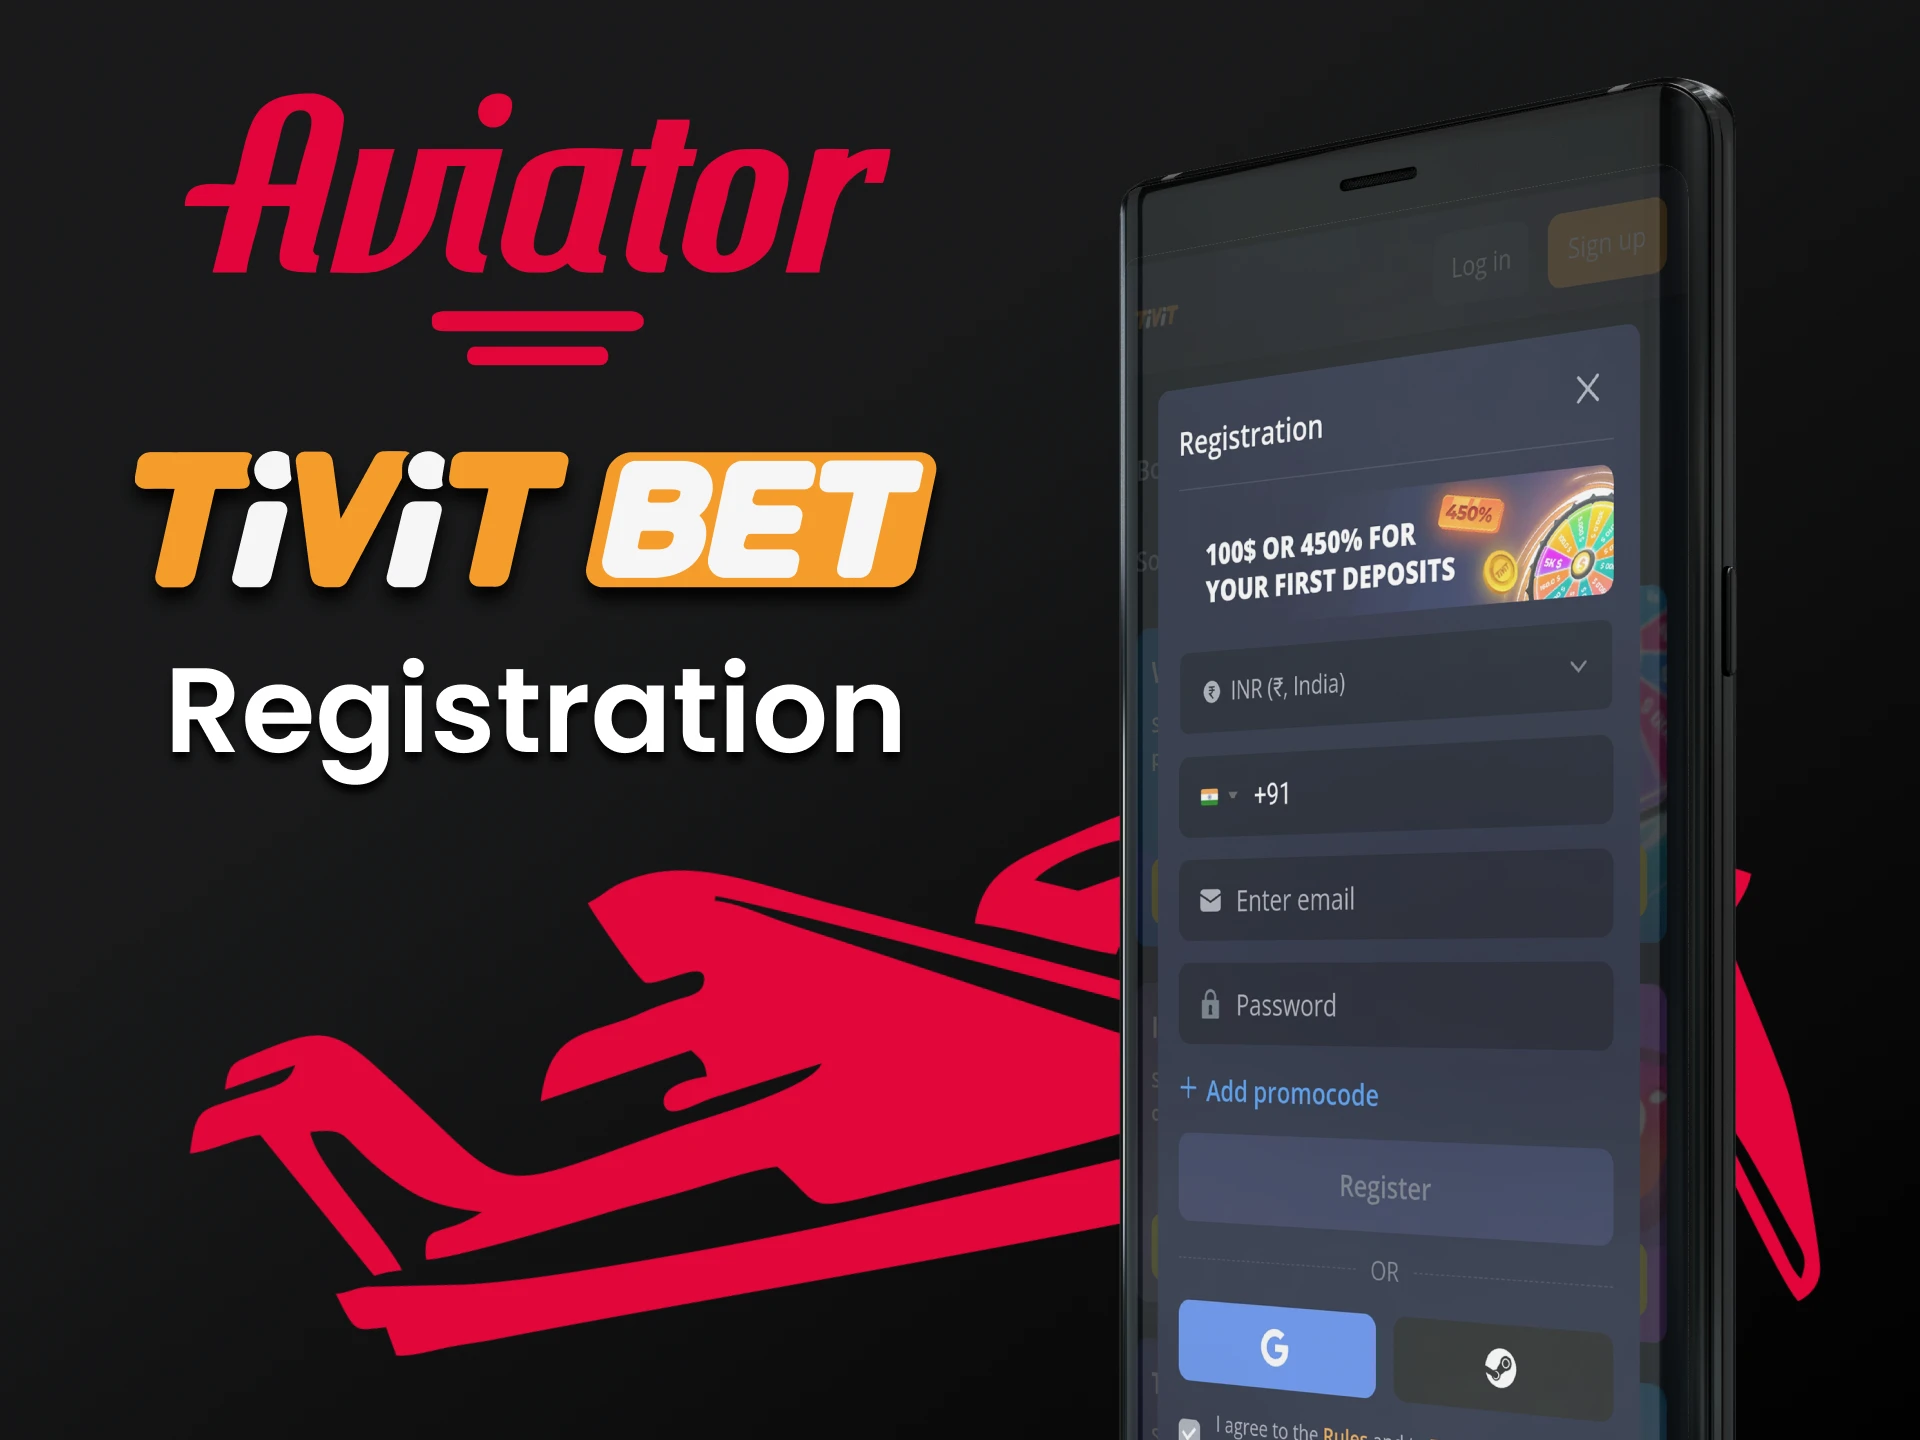 You can register in the Tivitbet application.